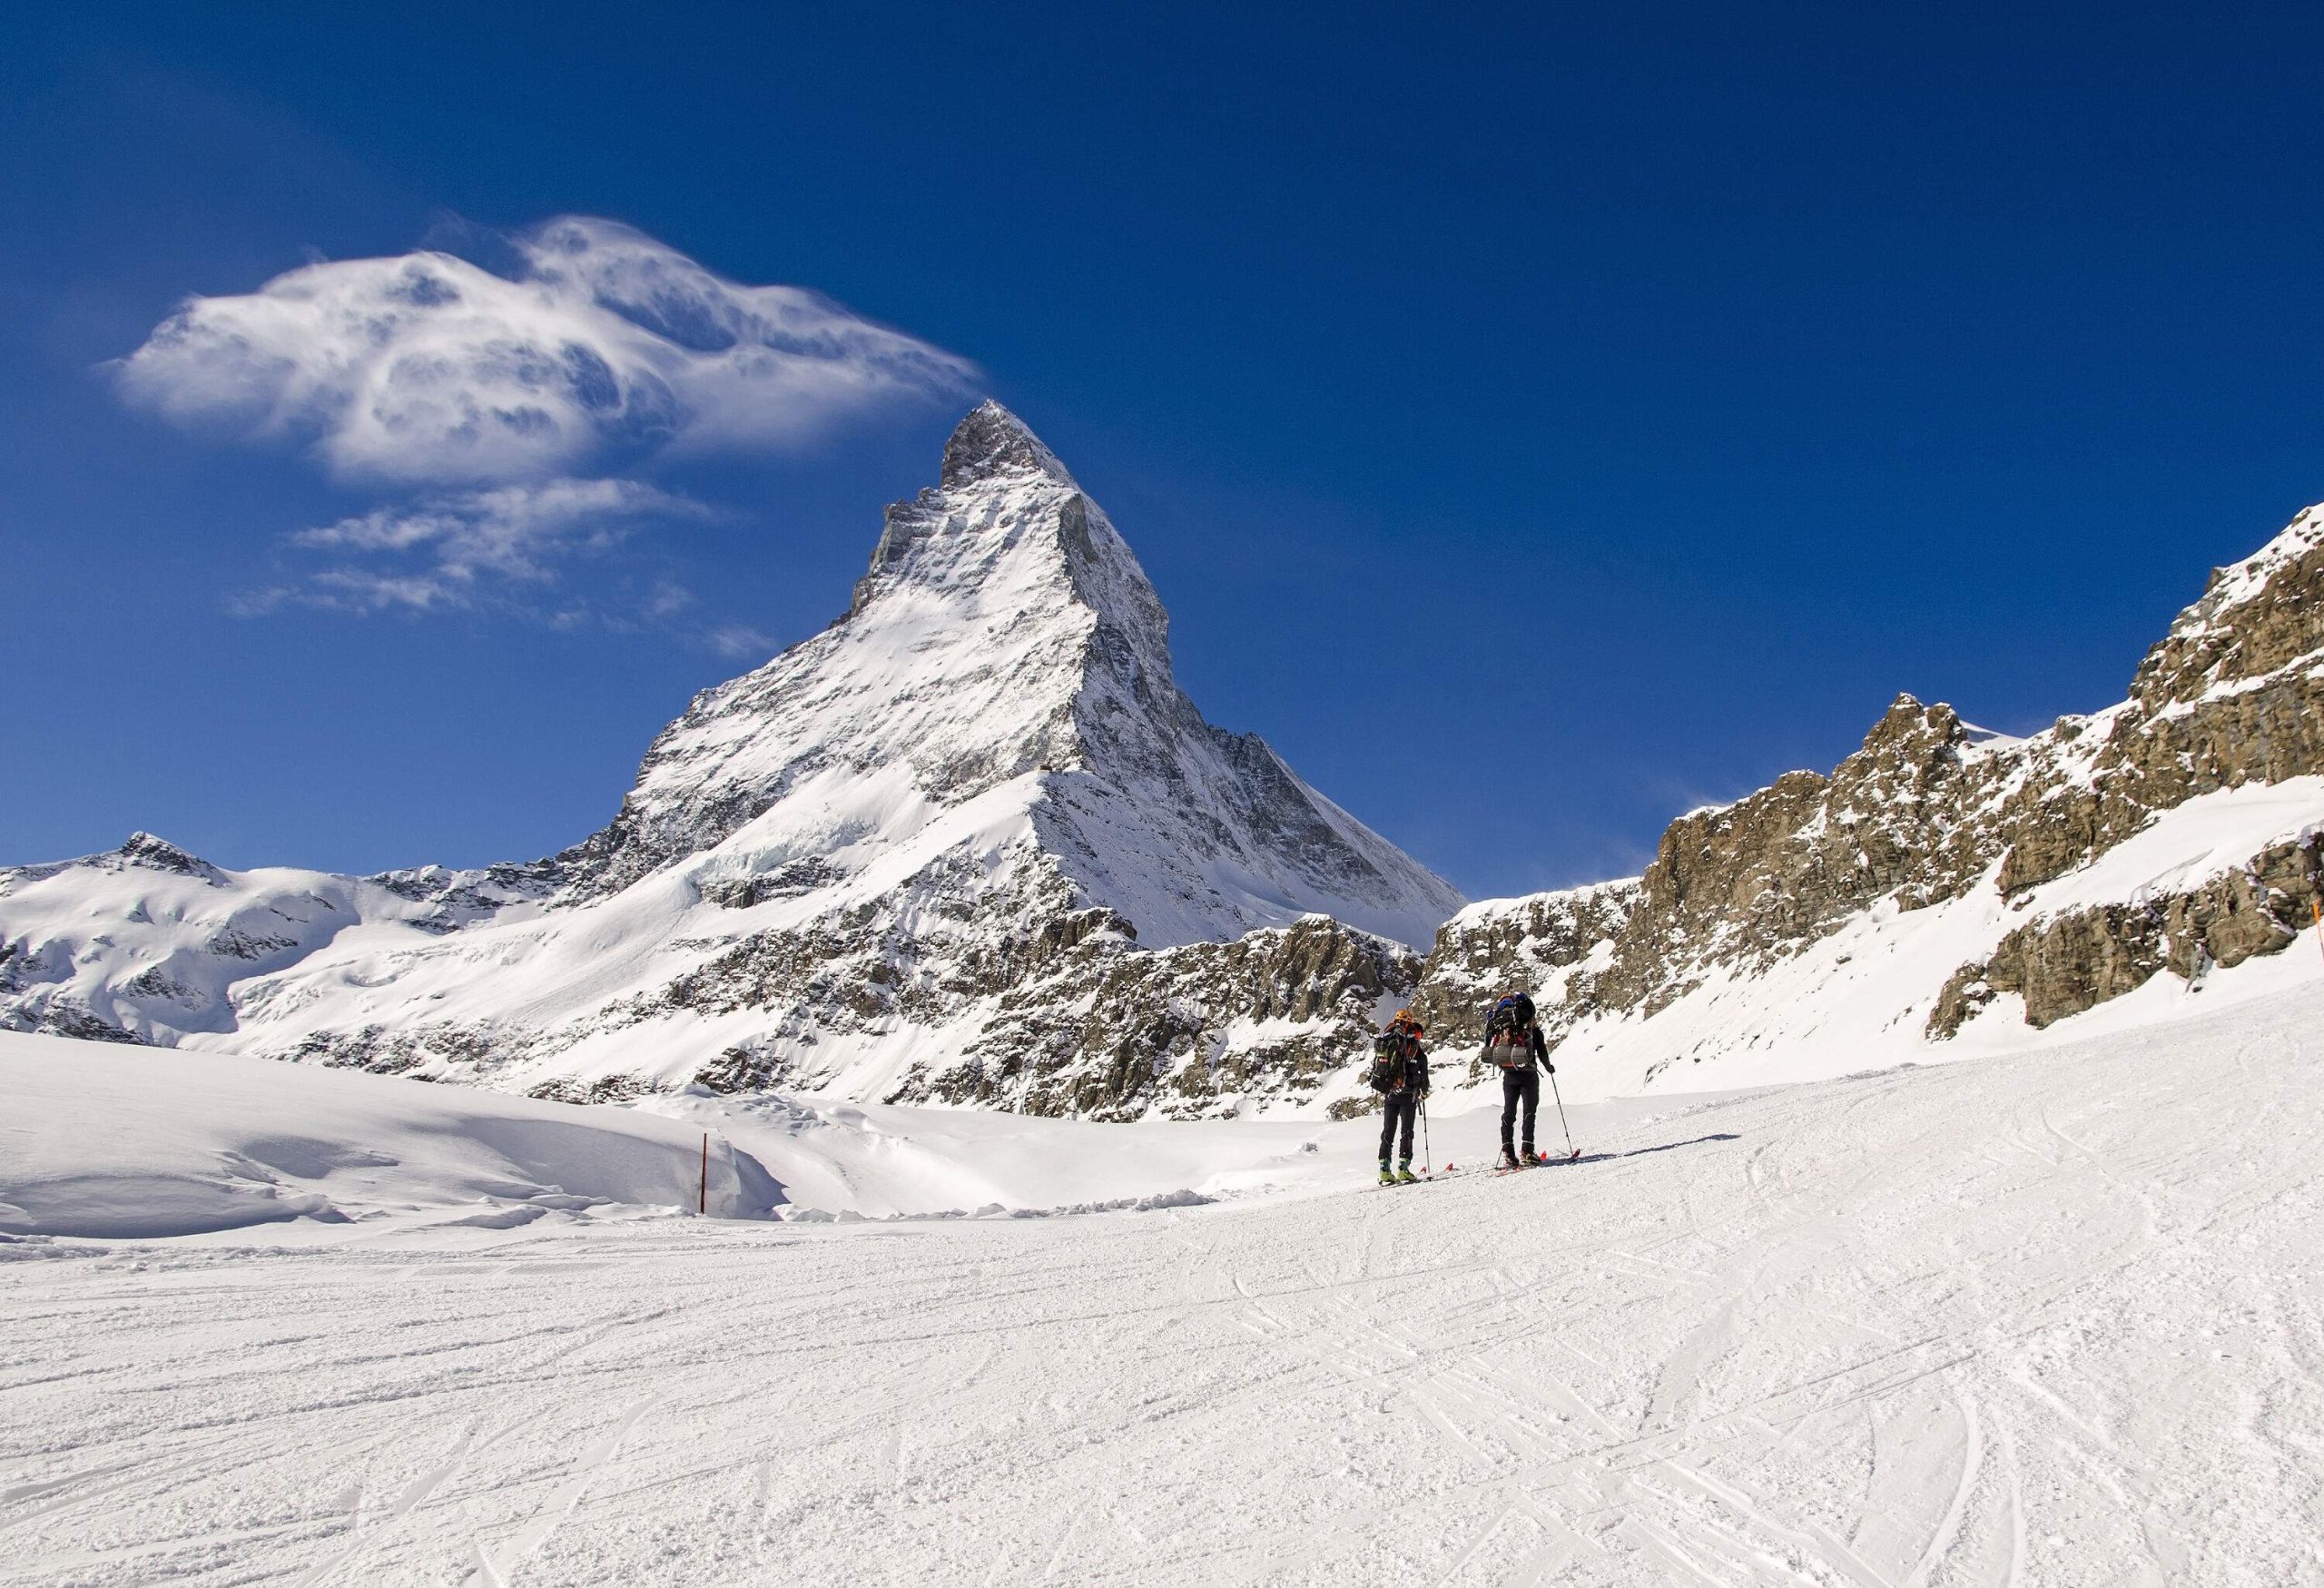 Two skiers standing on deep snow land beneath a rocky mountain covered in snow.